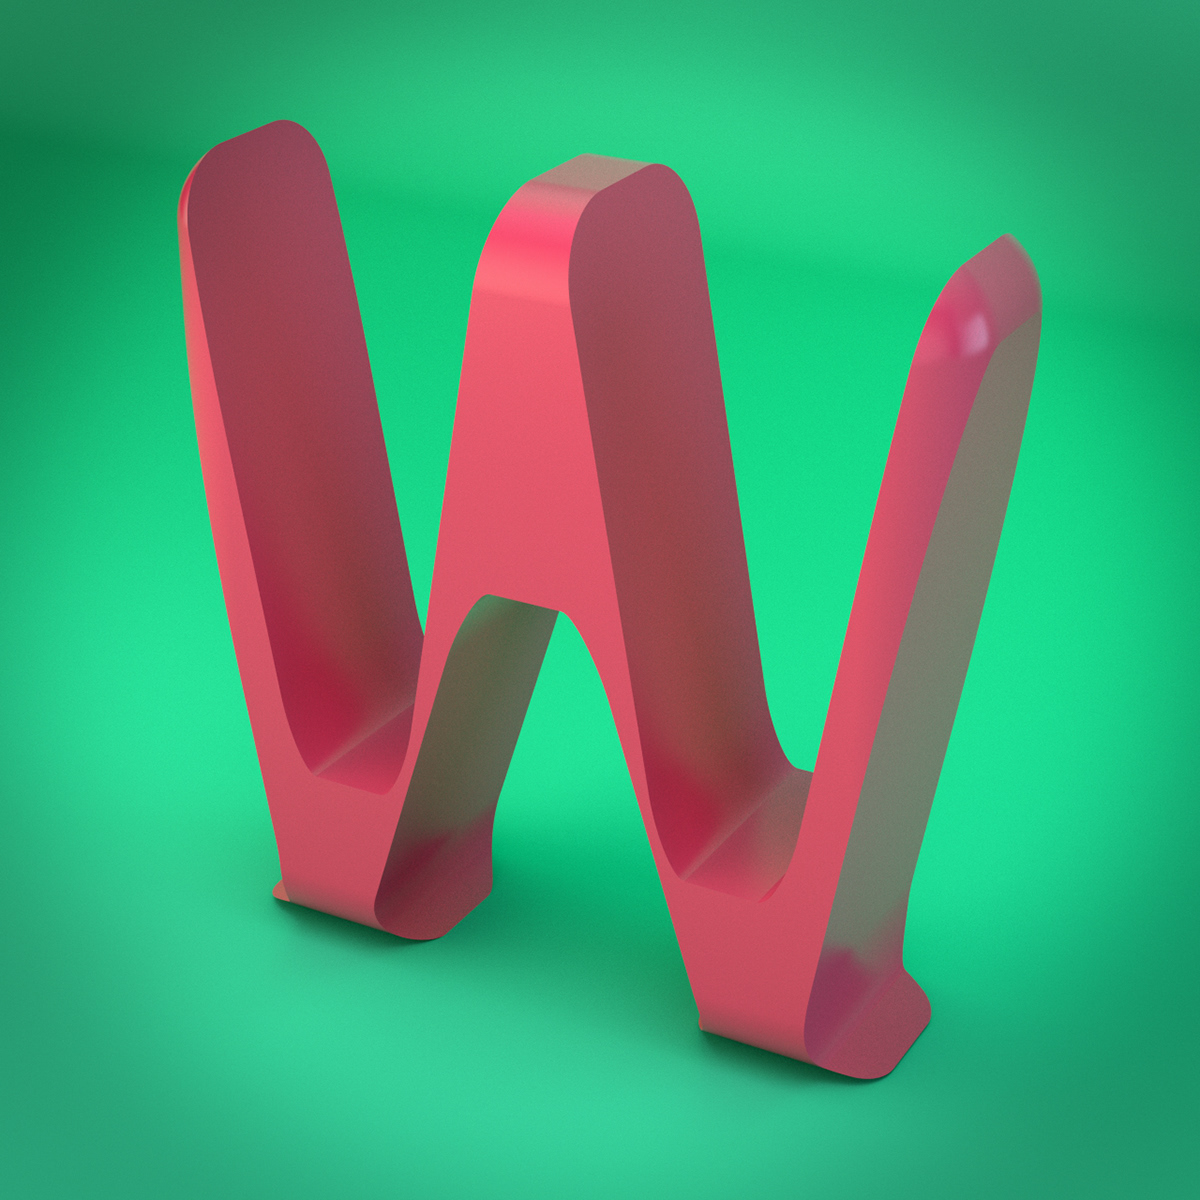 motion design typography   3D CGI letters